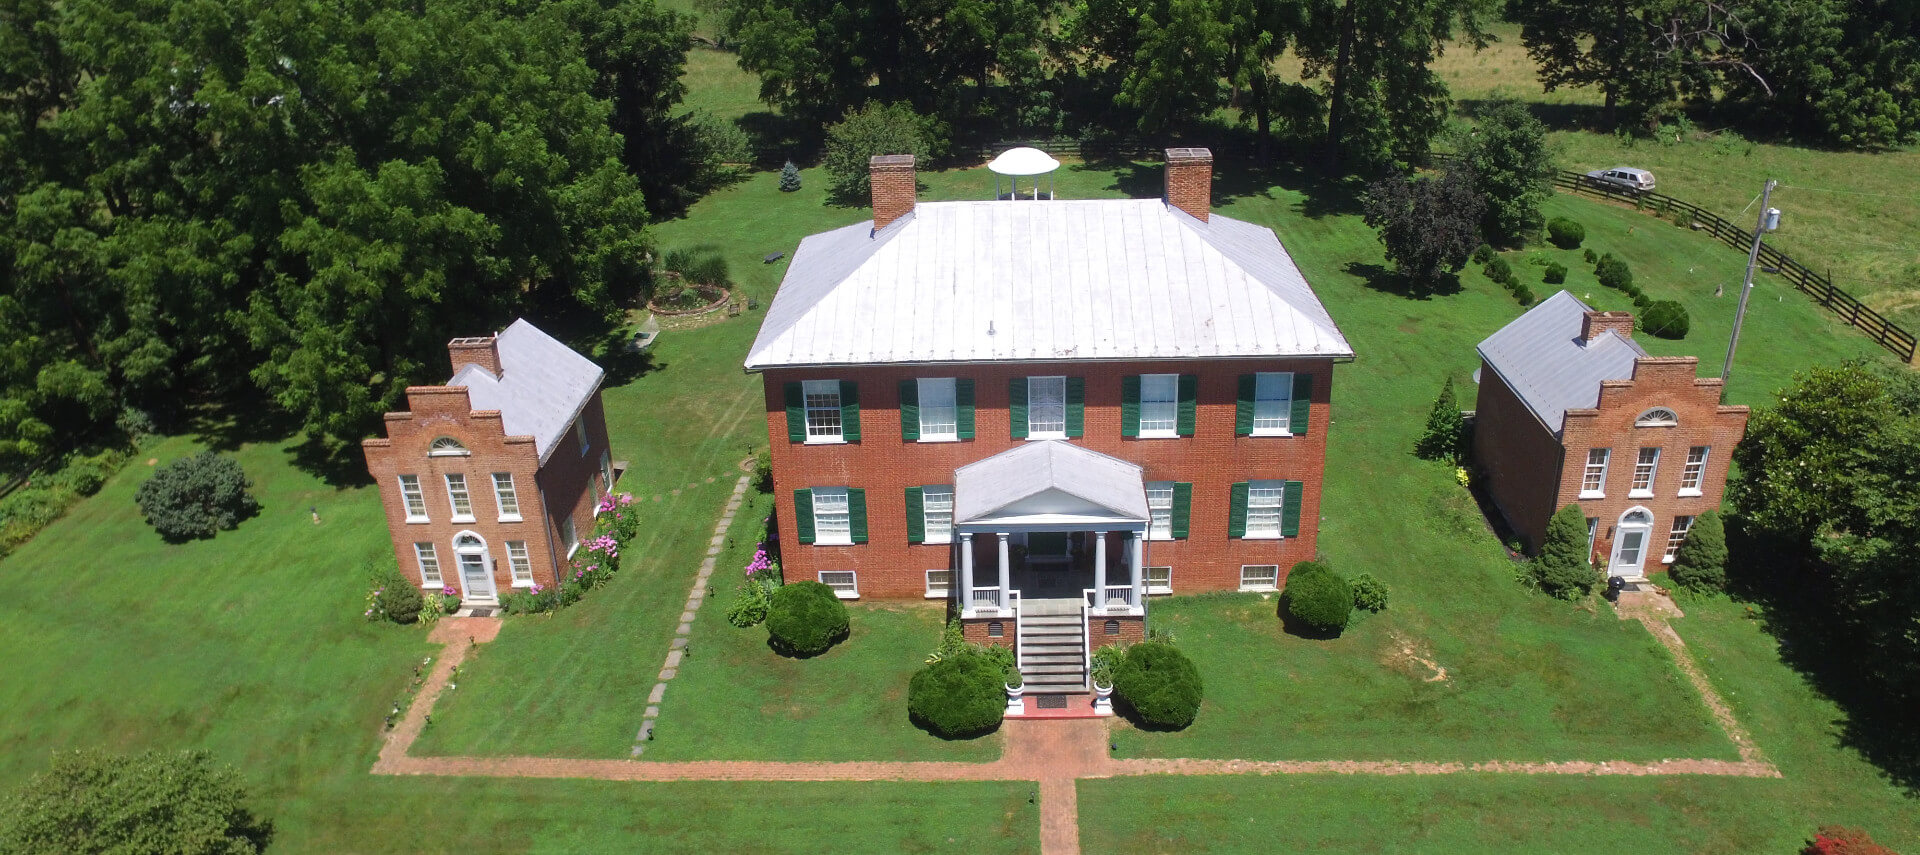 Large brick manor house with green shutters and expansive lawns